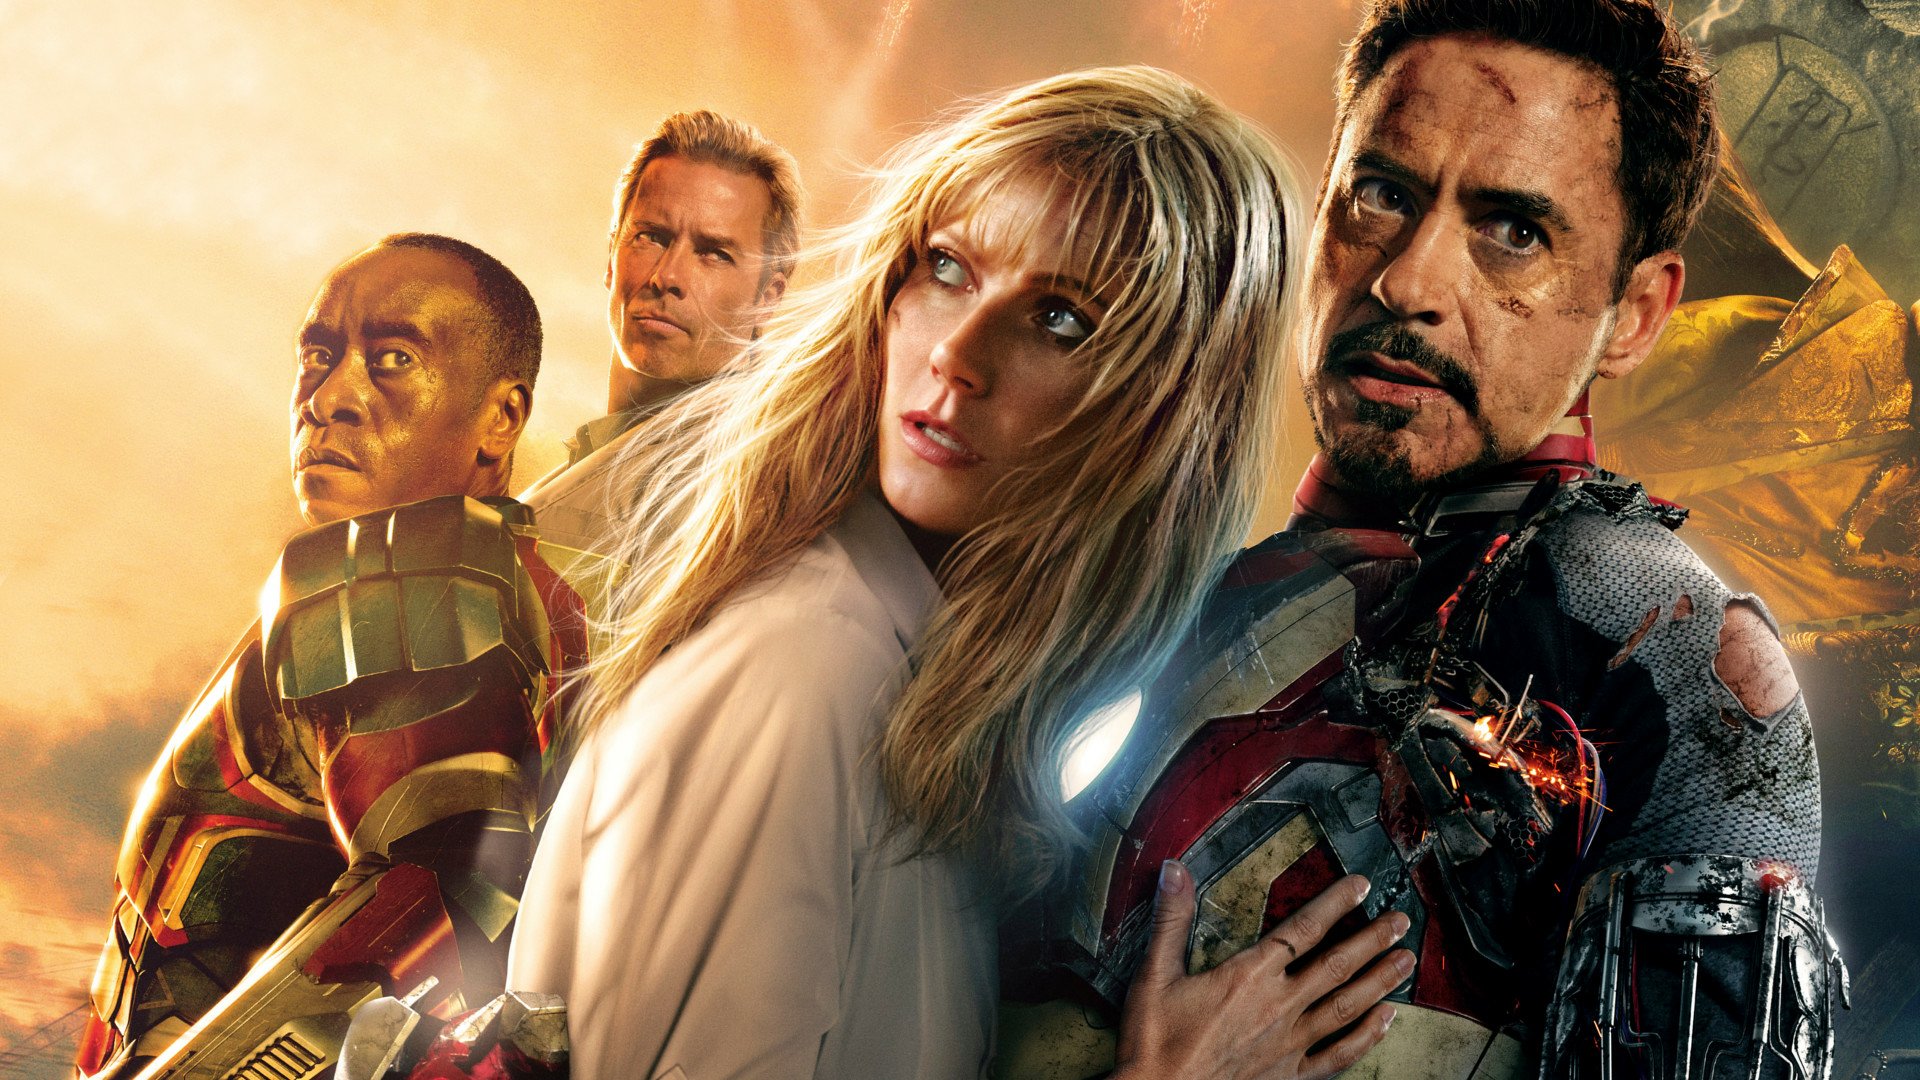 Iron man 3 full movie in hindi hd free download utorrent for windows victoire de la musique 2009 alain bashung torrent